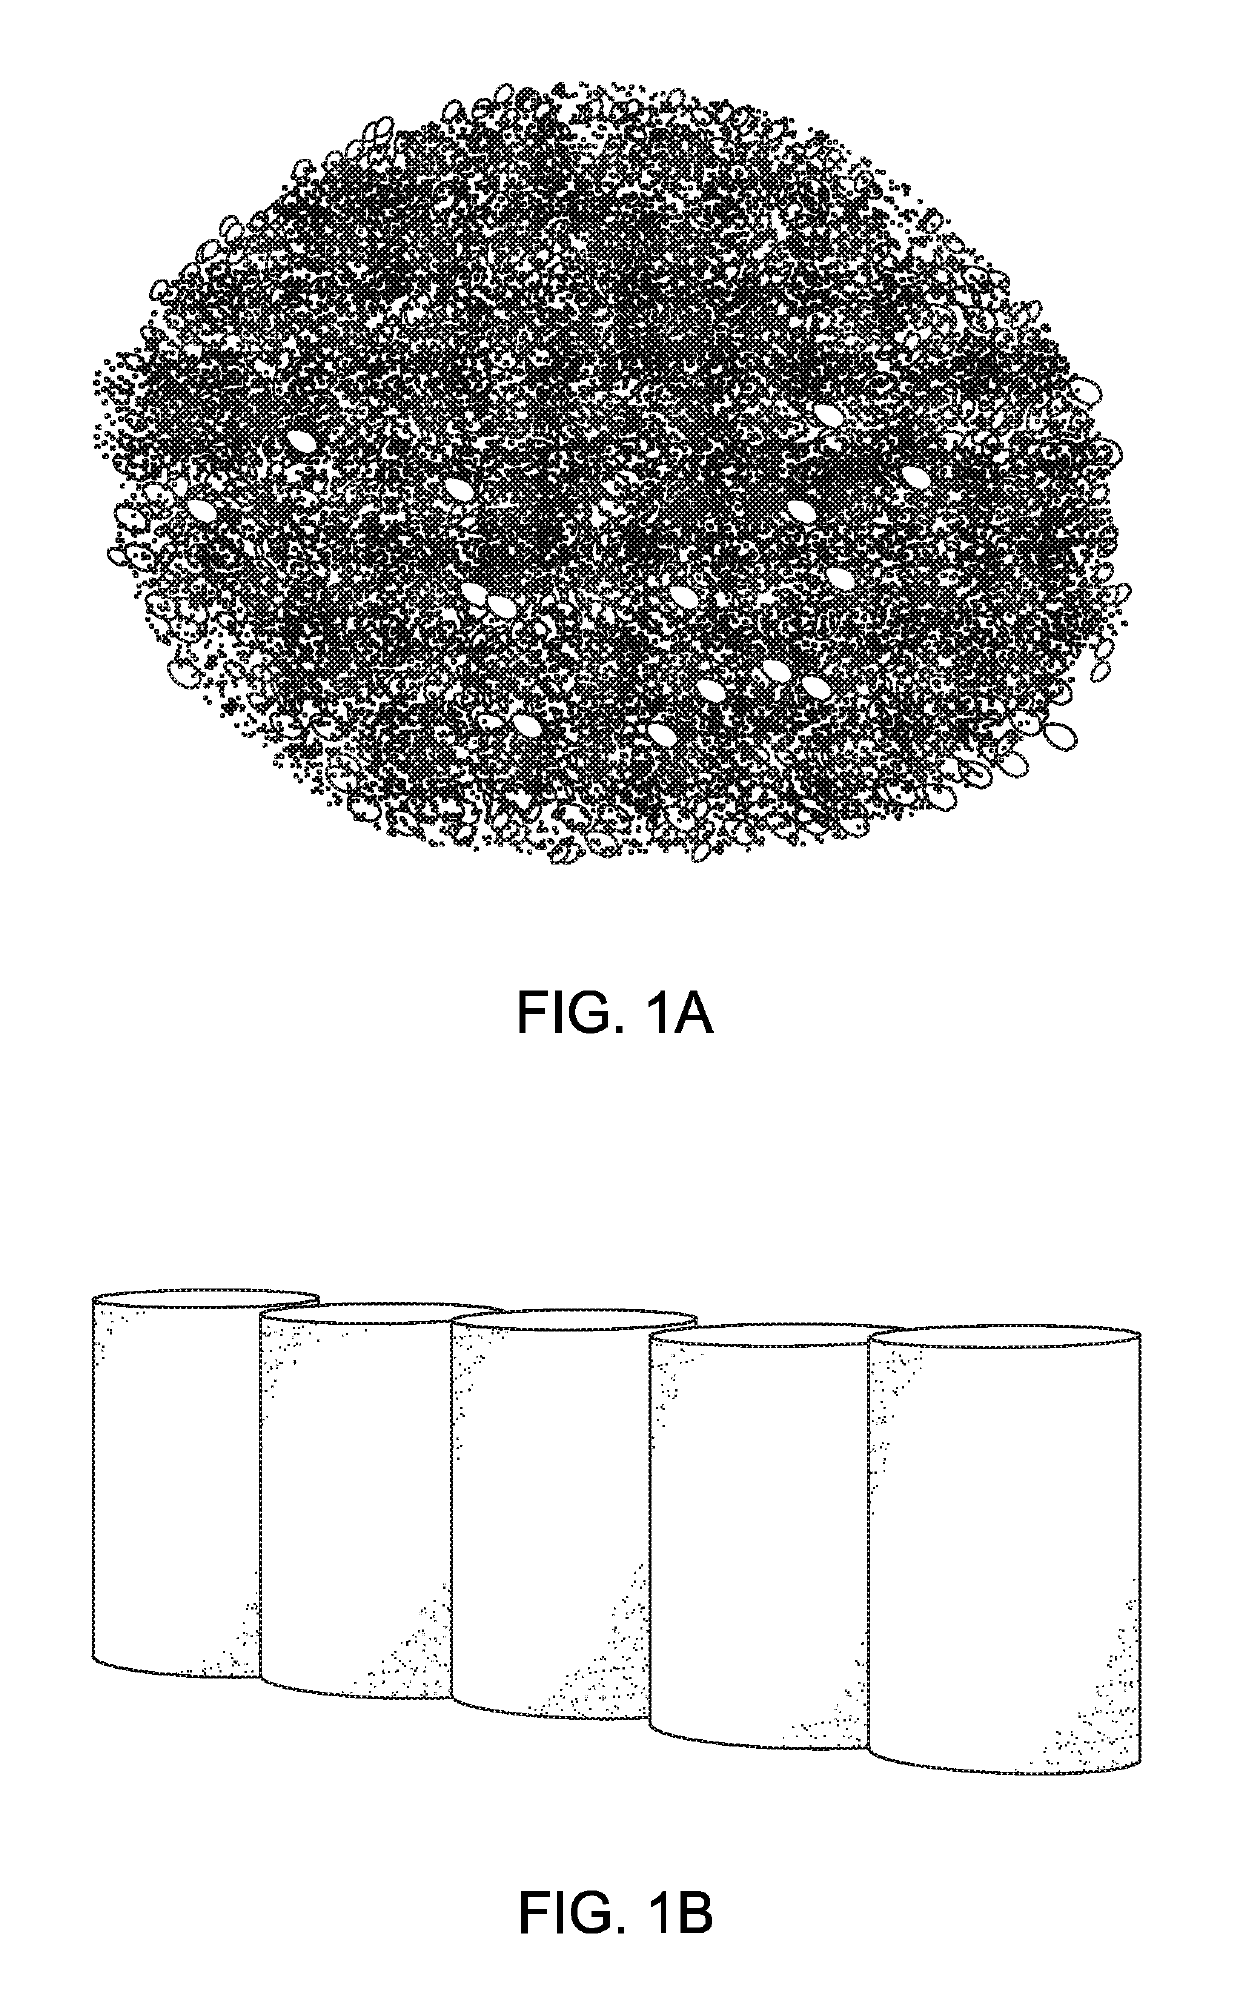 System and method for predicting mineralogical, textural, petrophysical and elastic properties at locations without rock samples